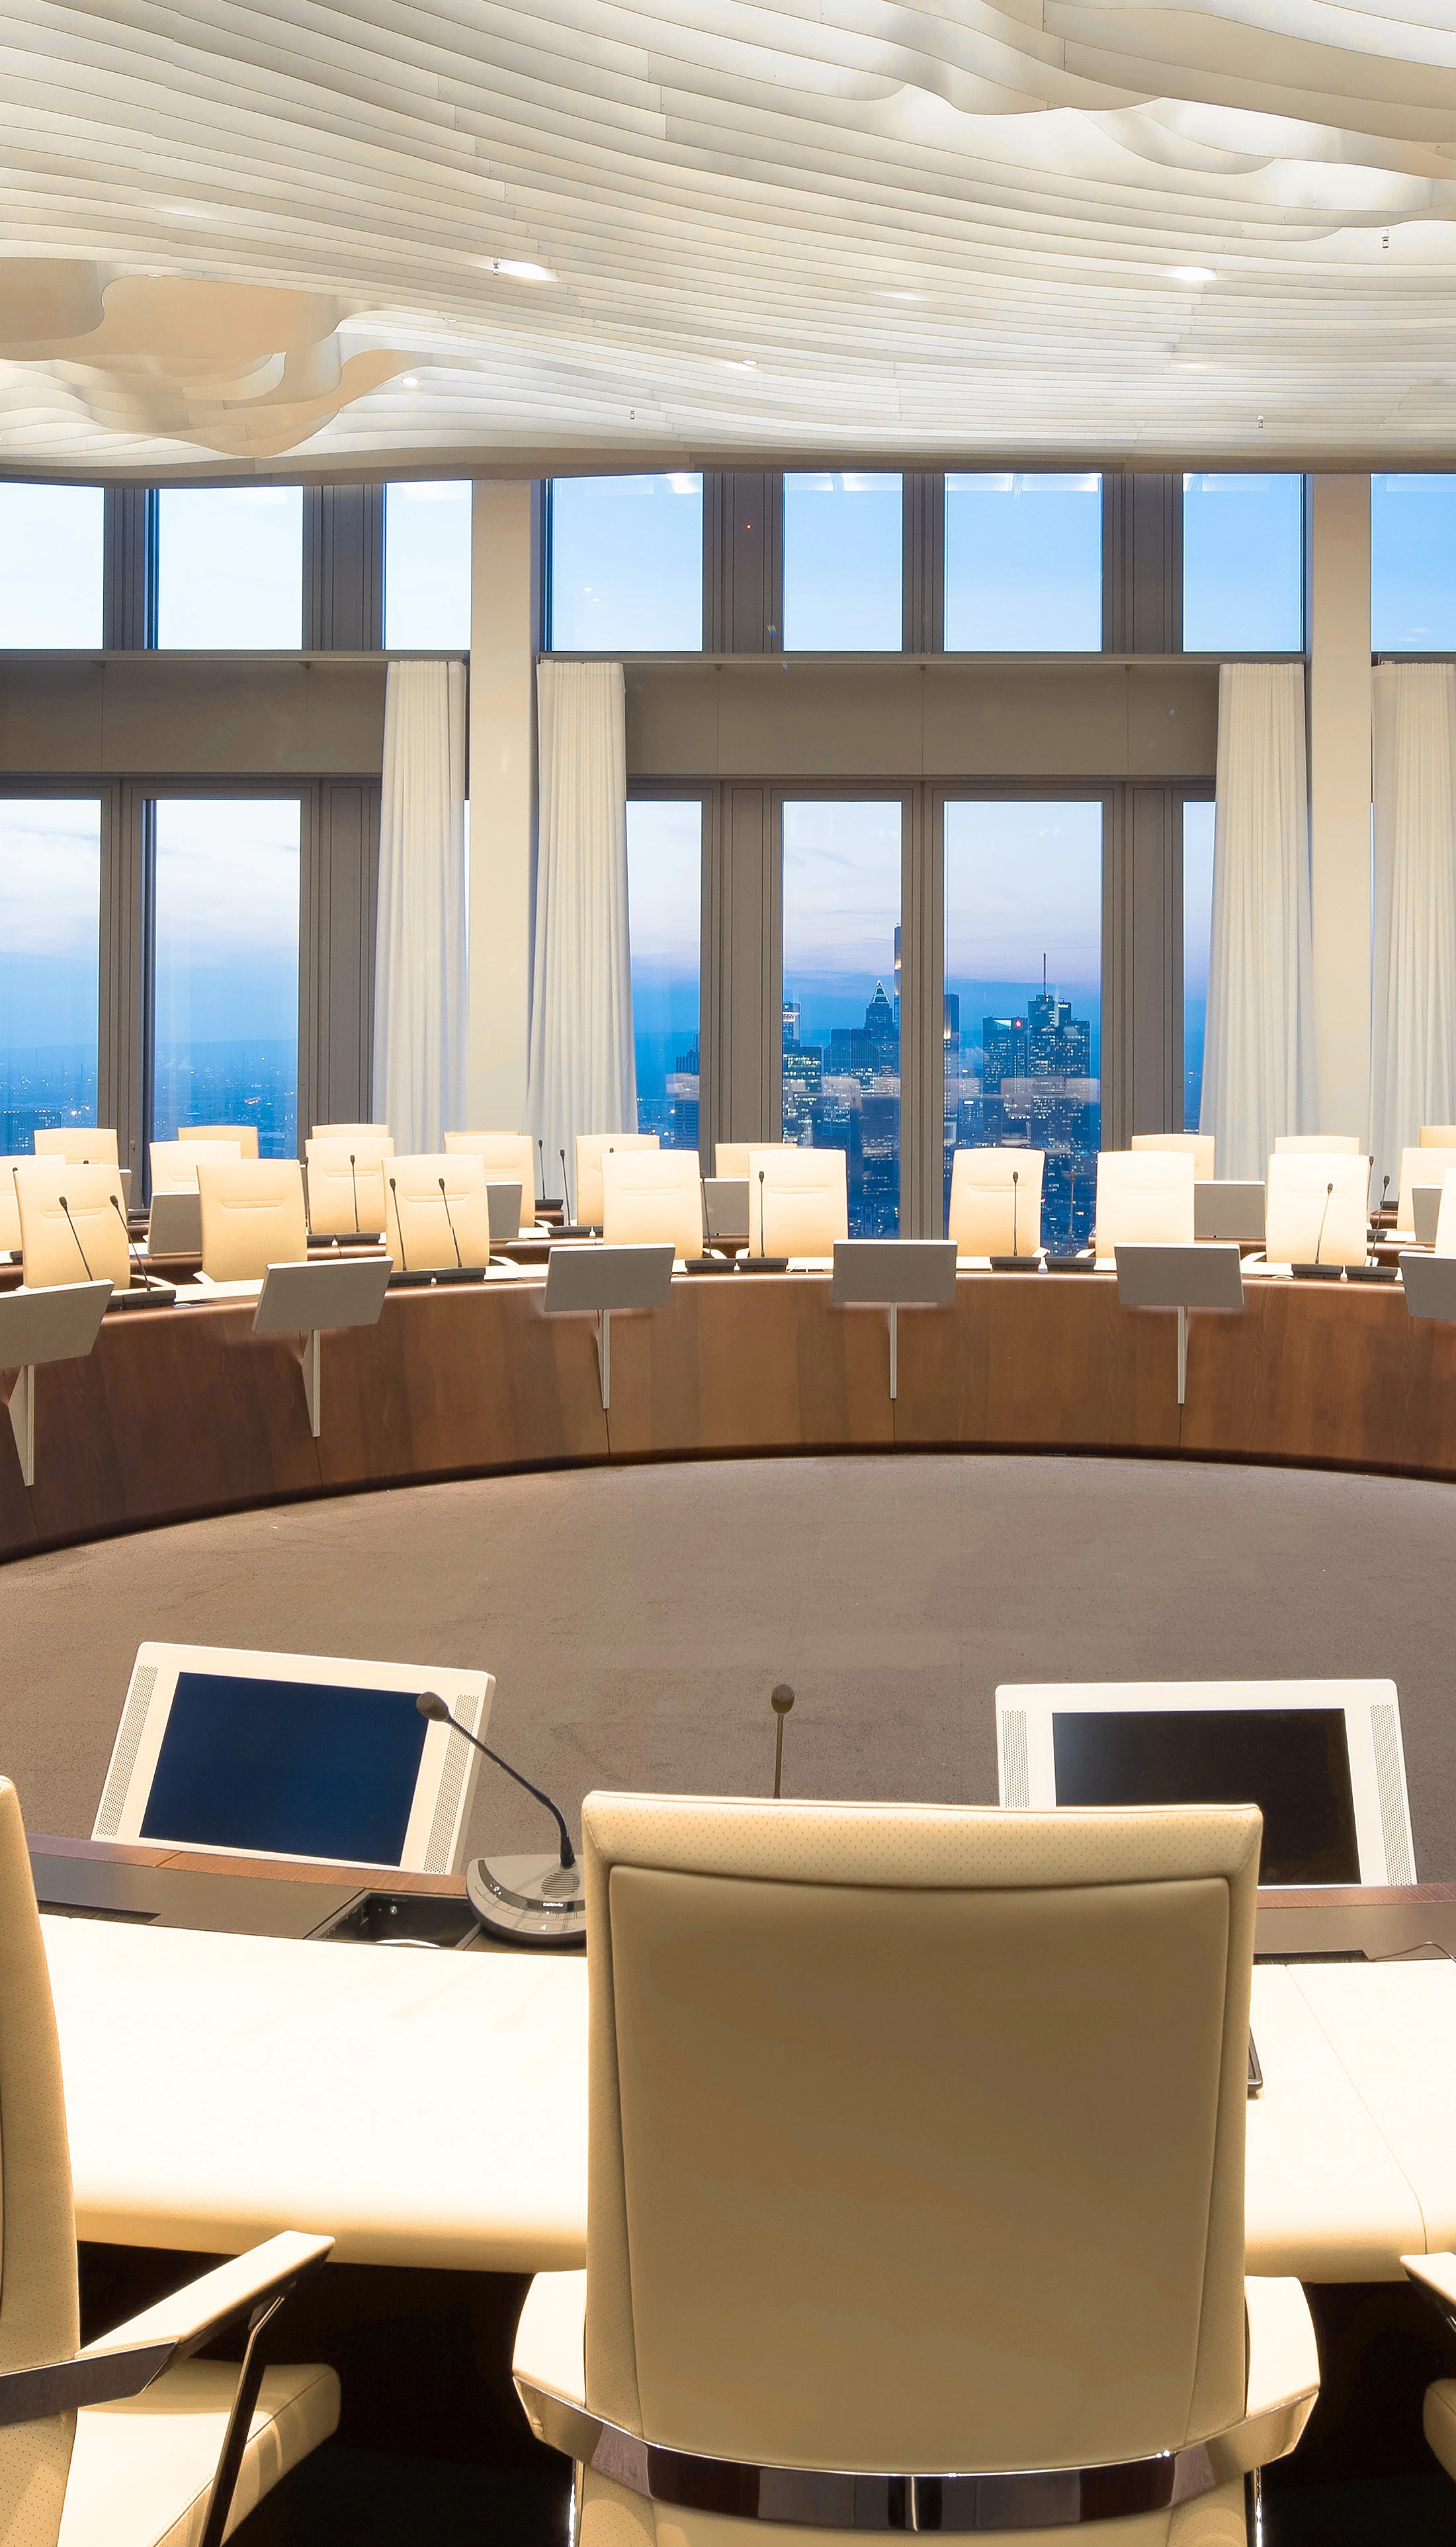 Integrated into the conference at the end of the table and technically equipped with speakers